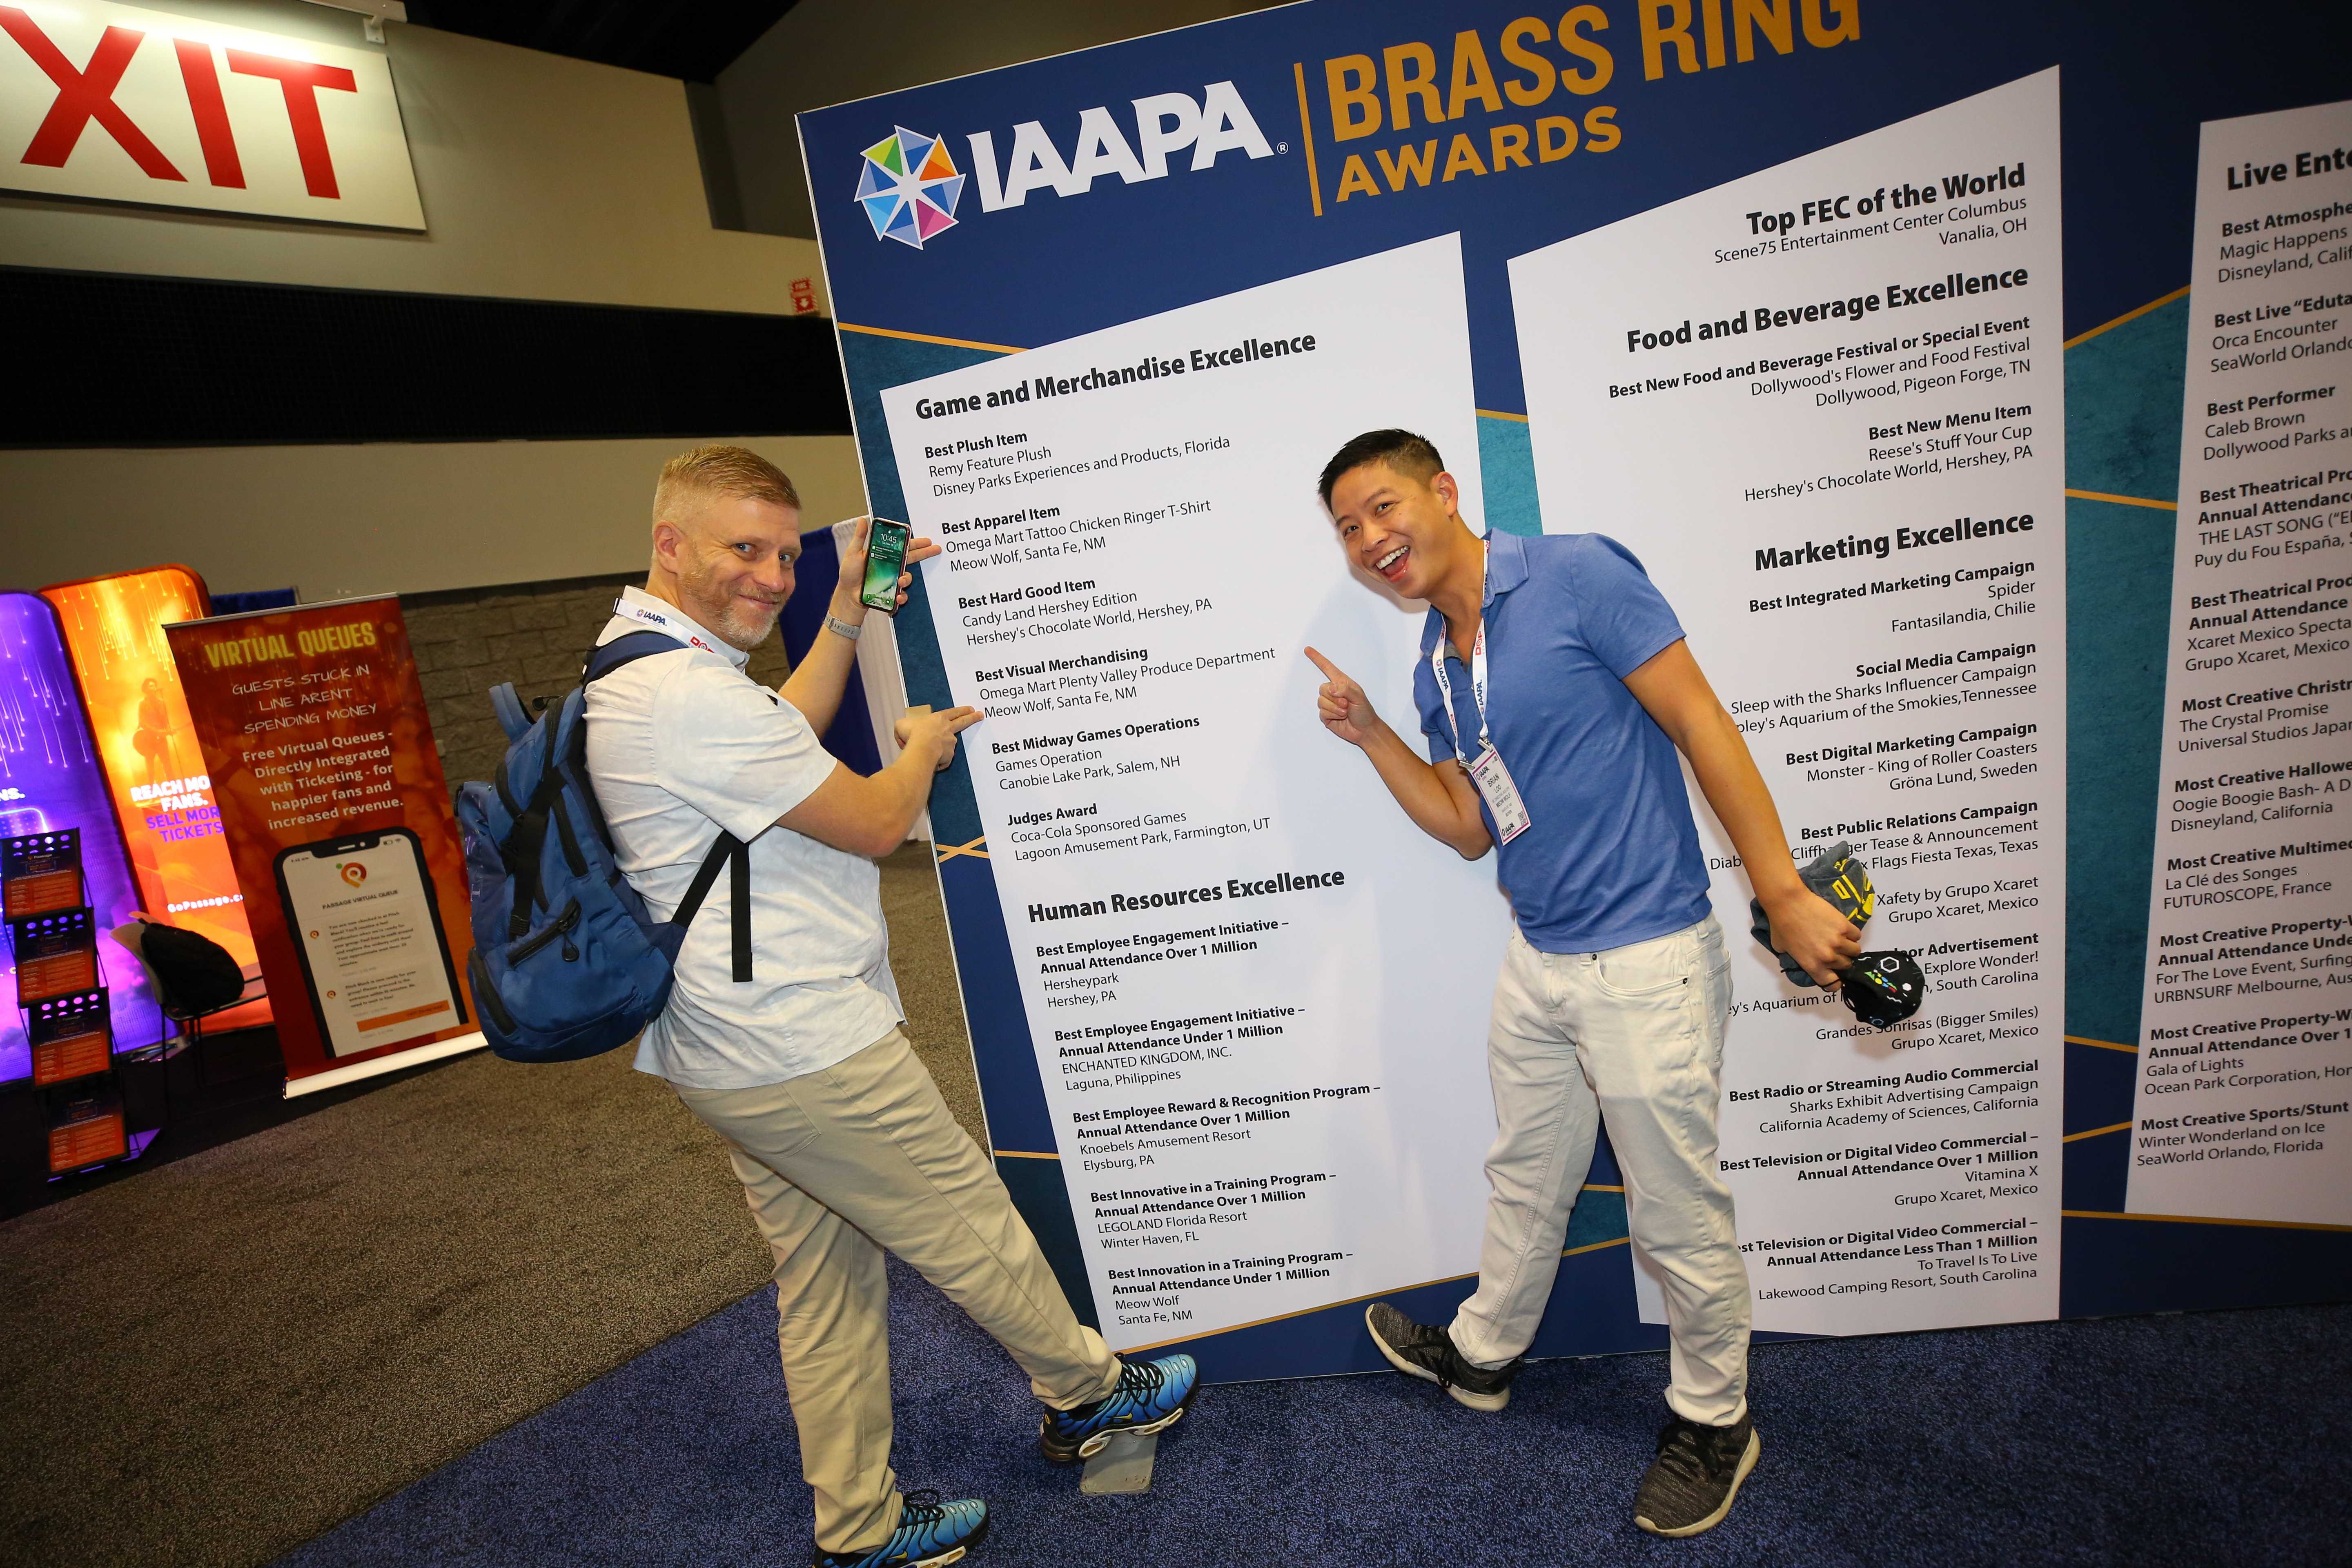 Award winners pose with the posting of their win at IAAPA Expo